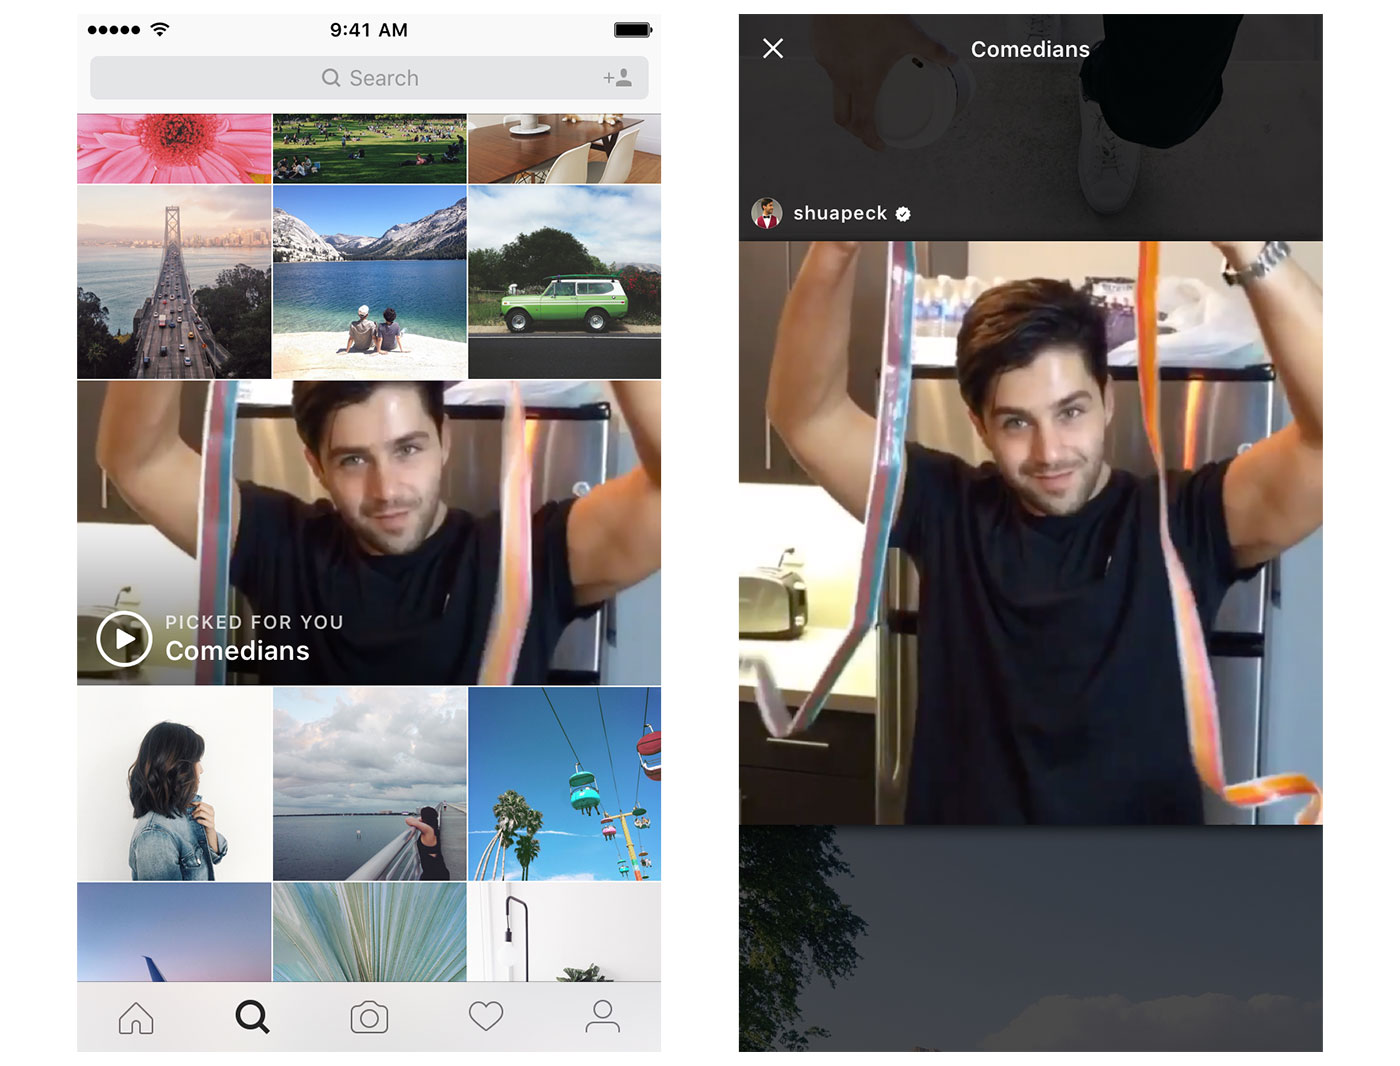 Instagram adds more video channels to your 'Explore' feed